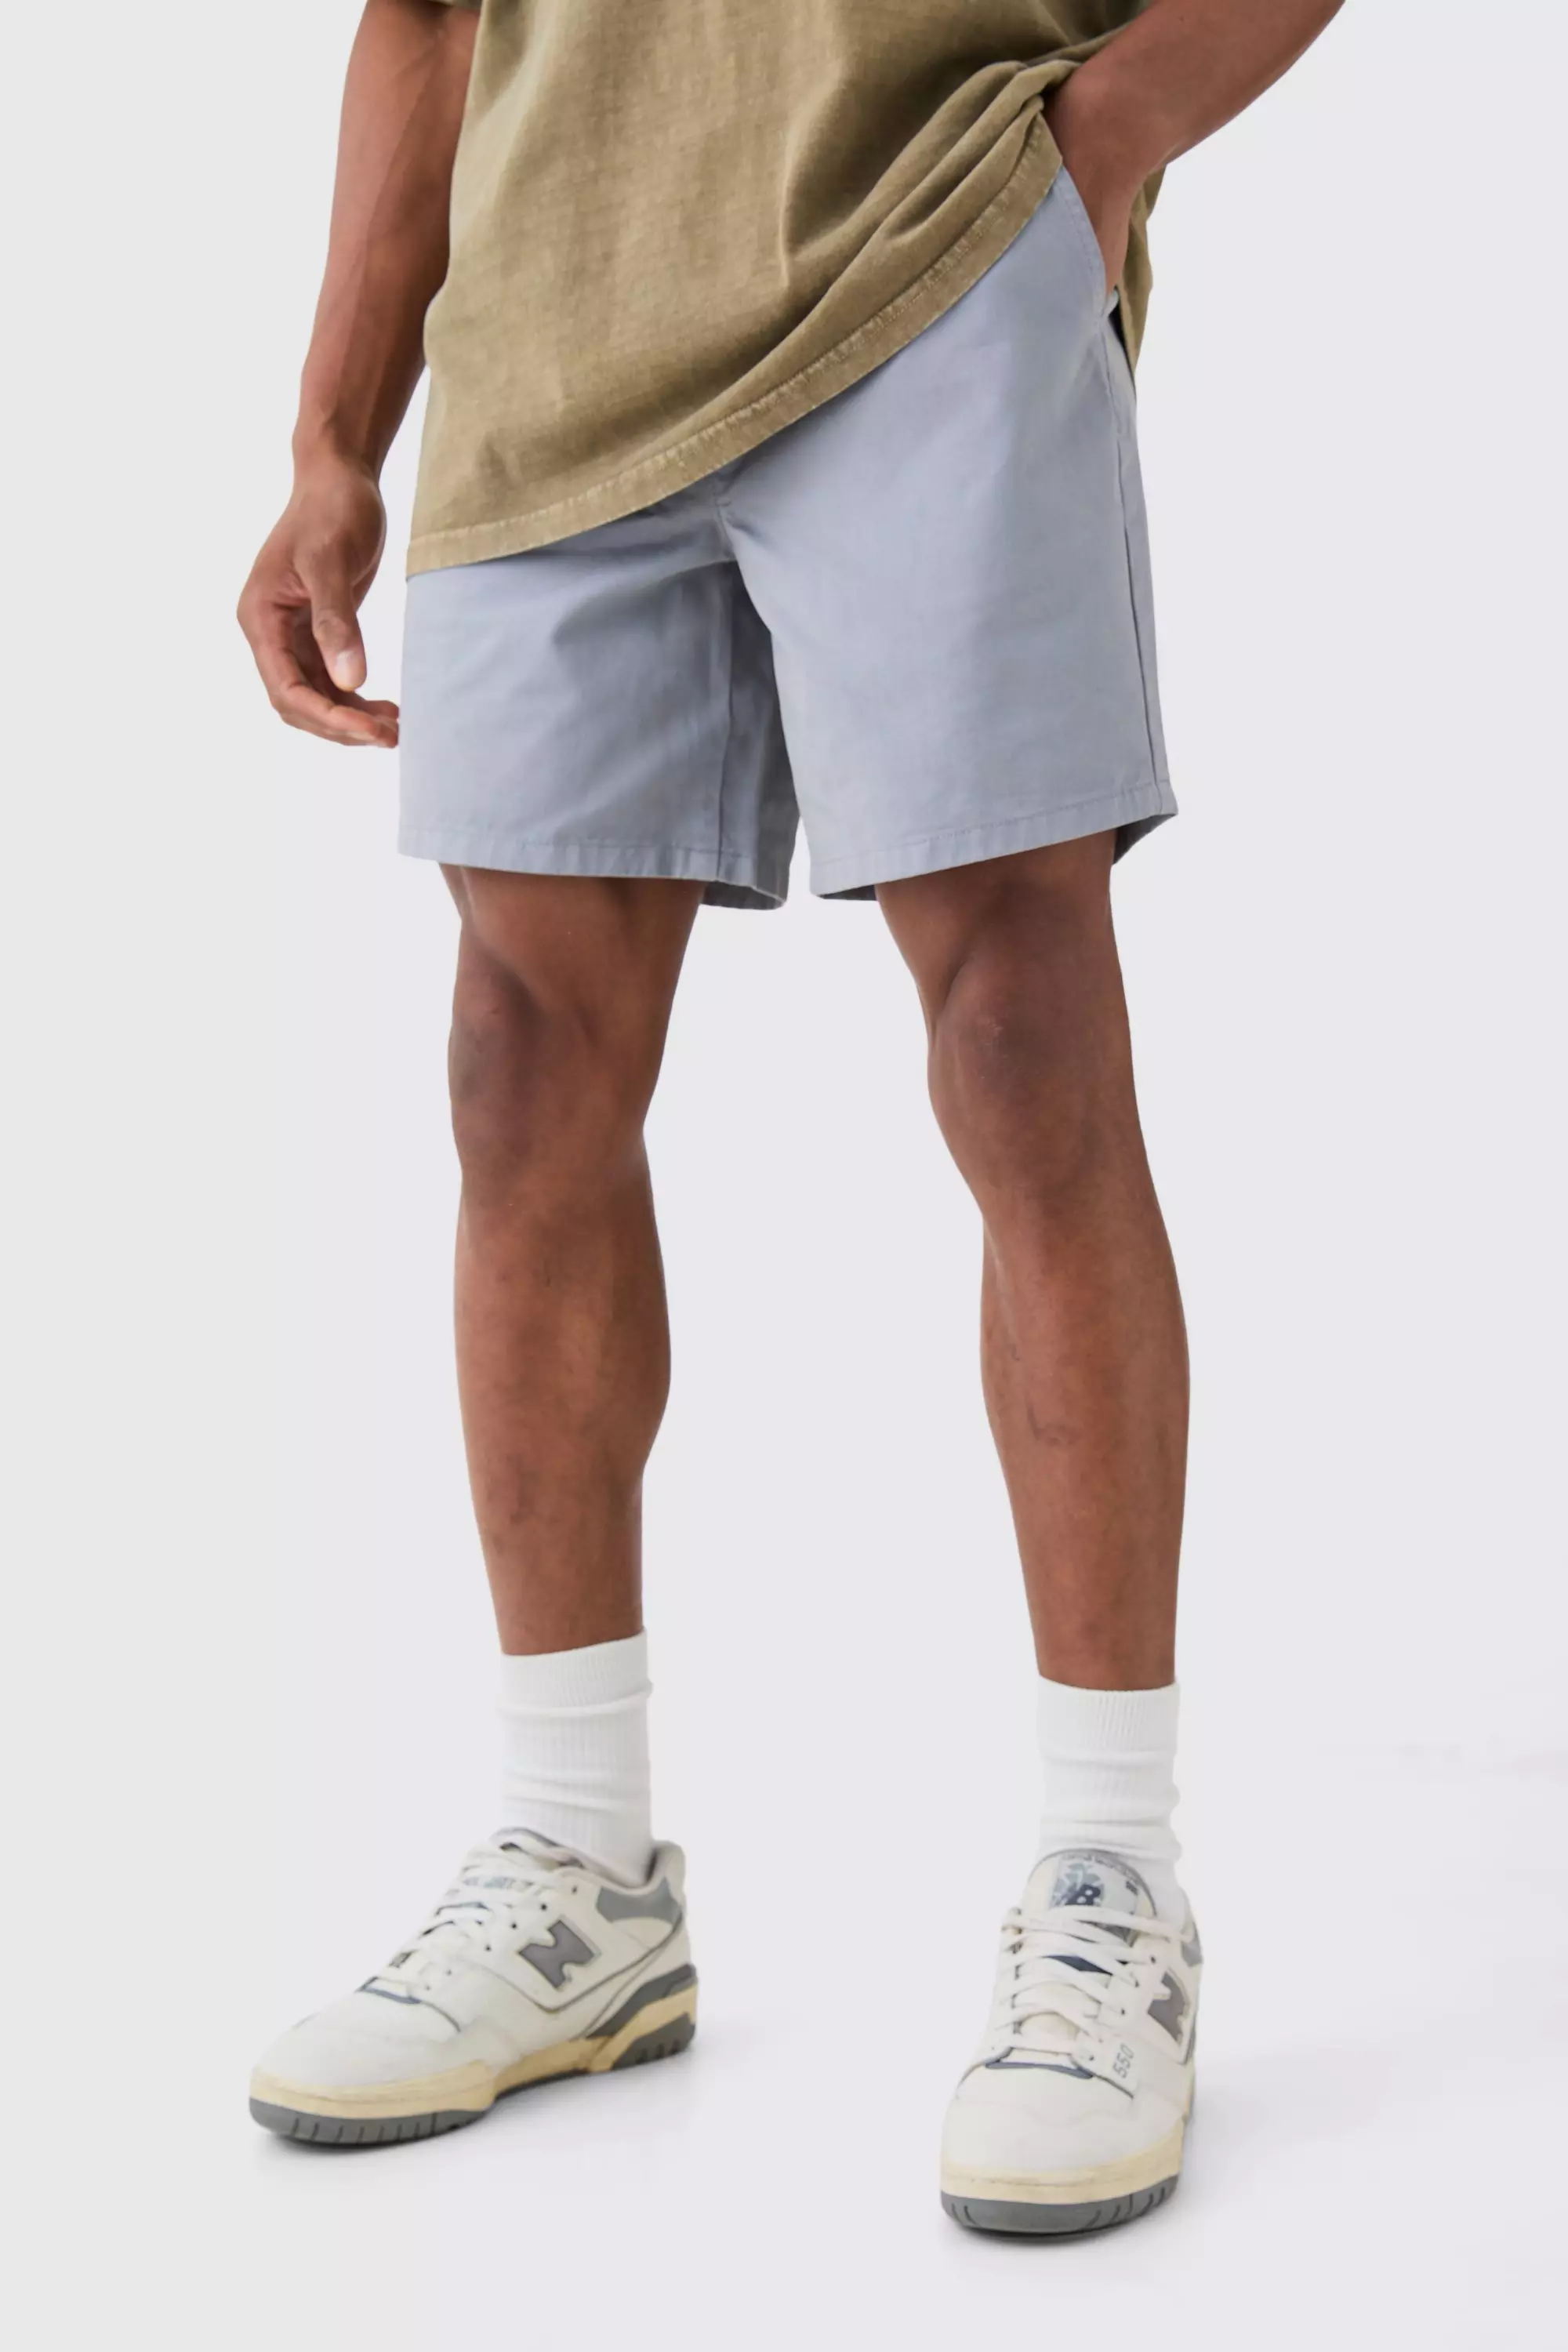 Grey Relaxed Fit Short Shorts